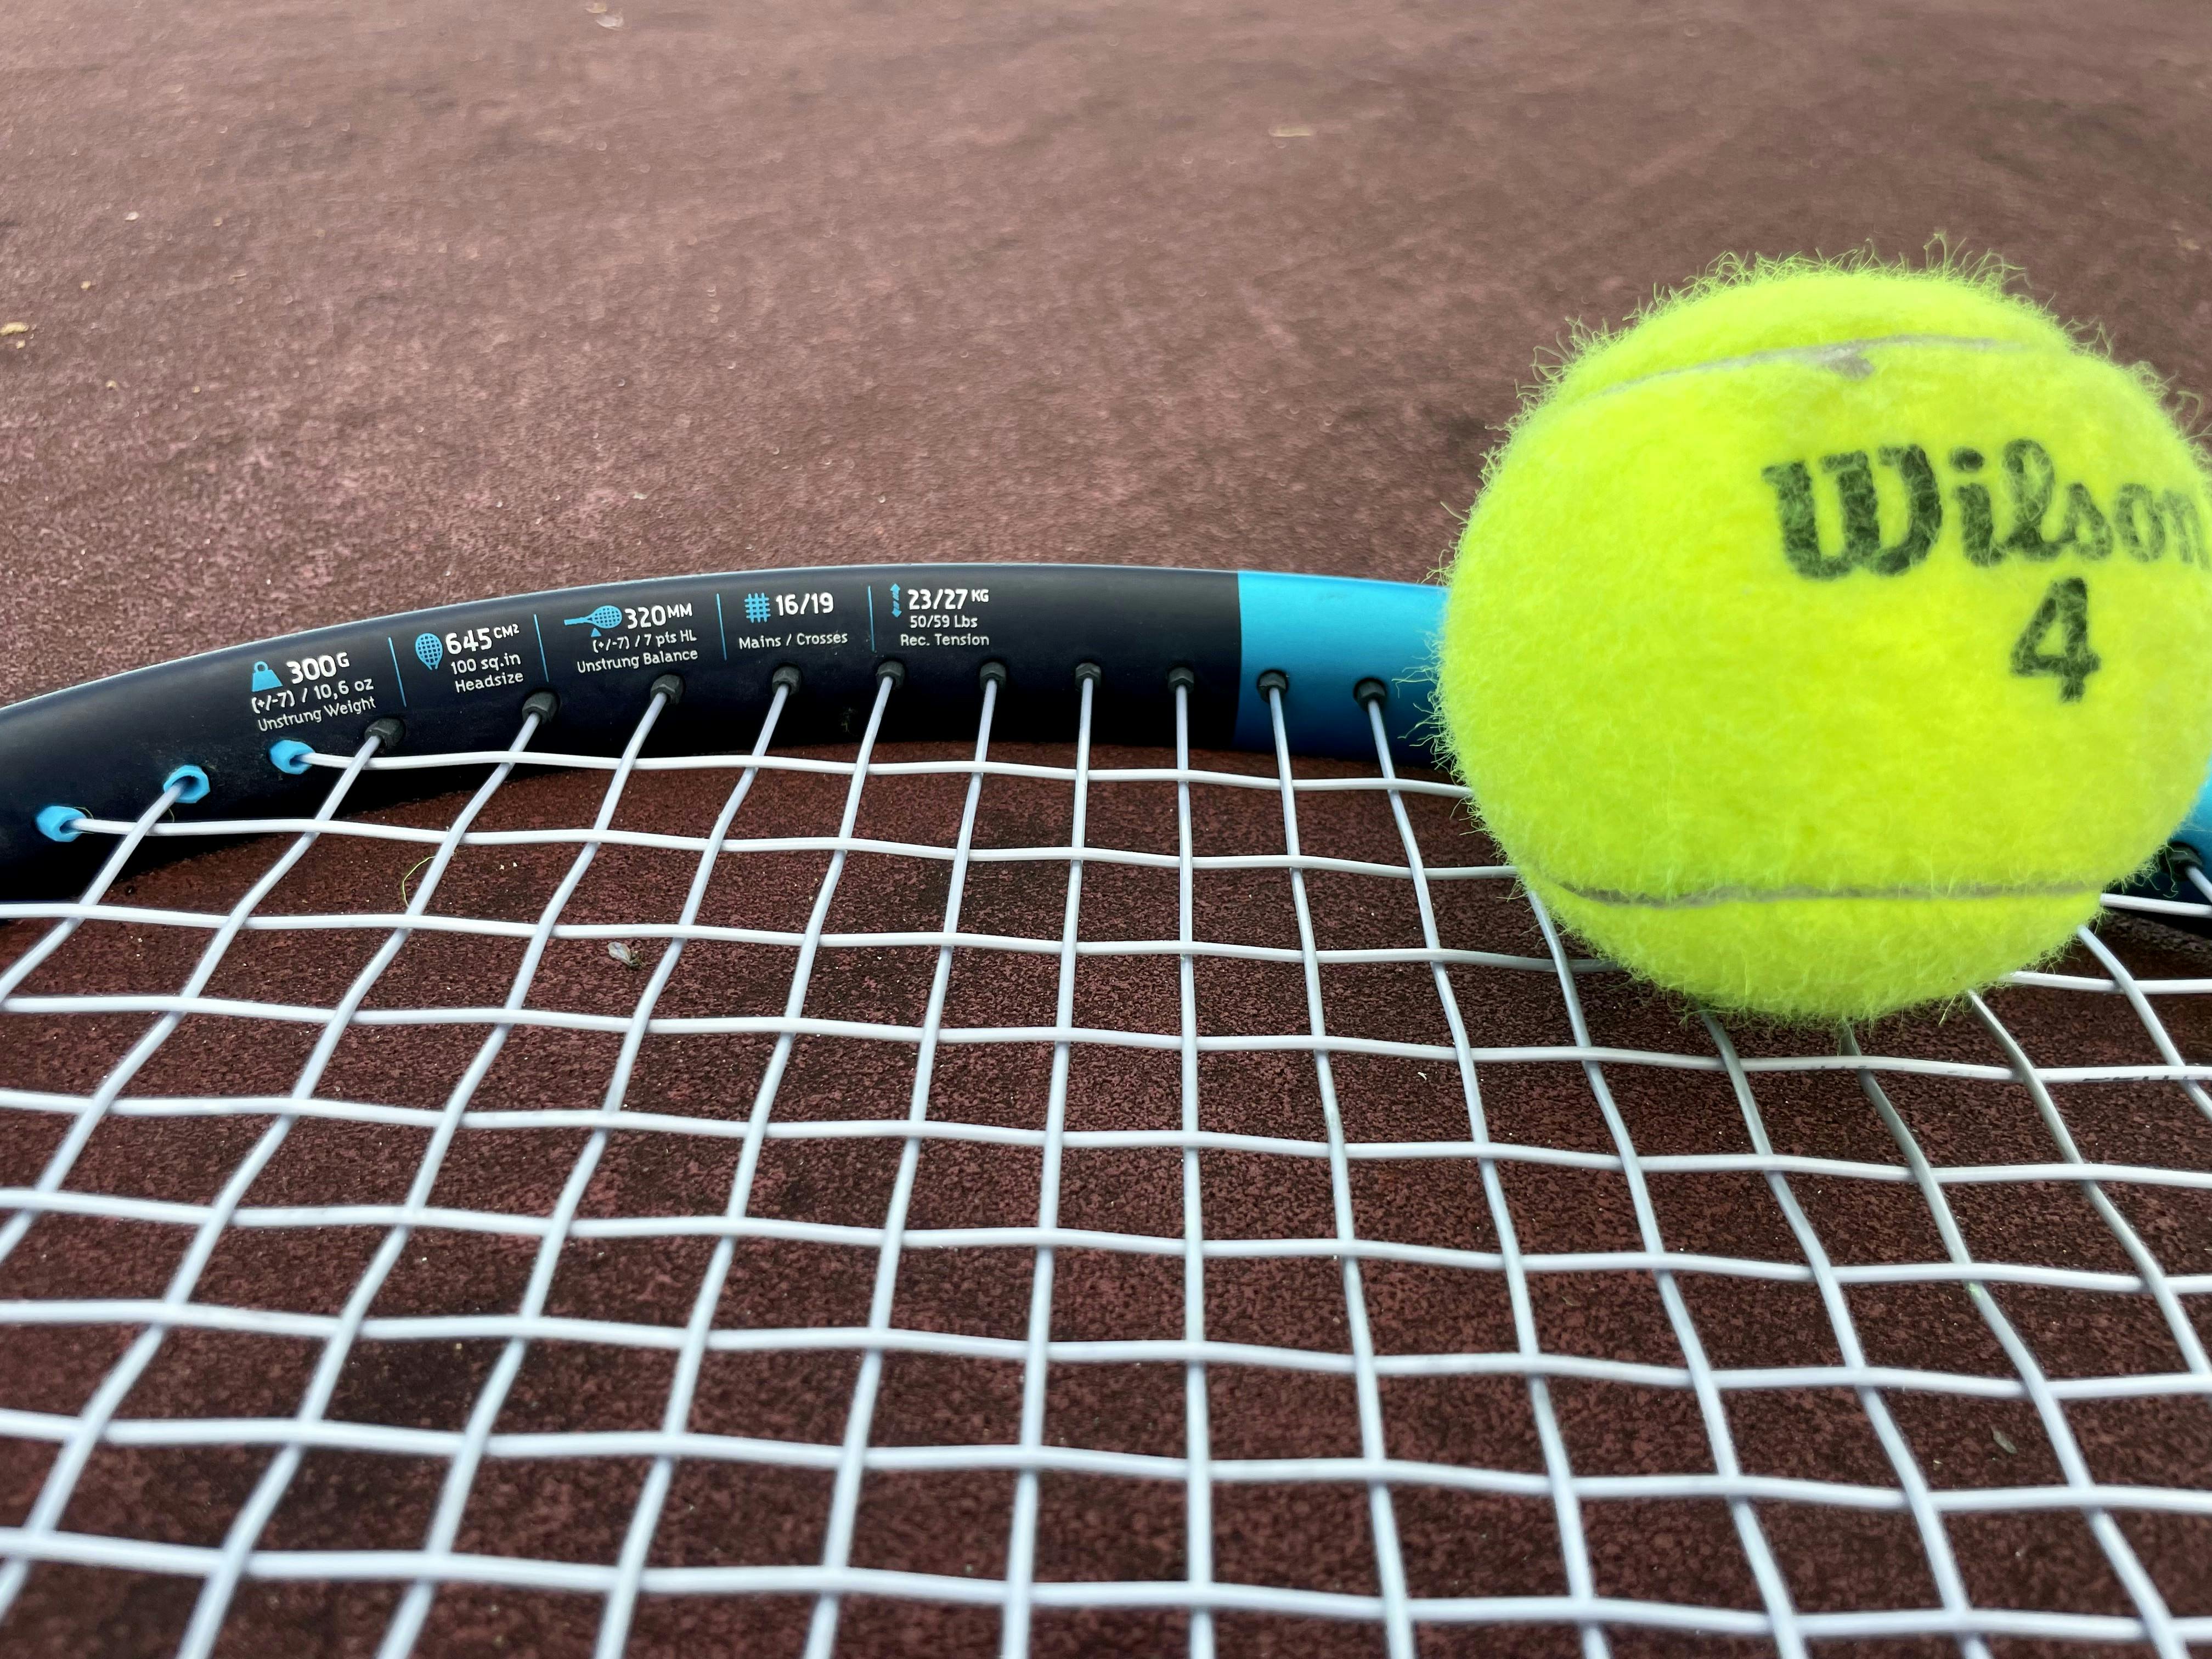 Details on the Babolat Pure Drive 100 2021.